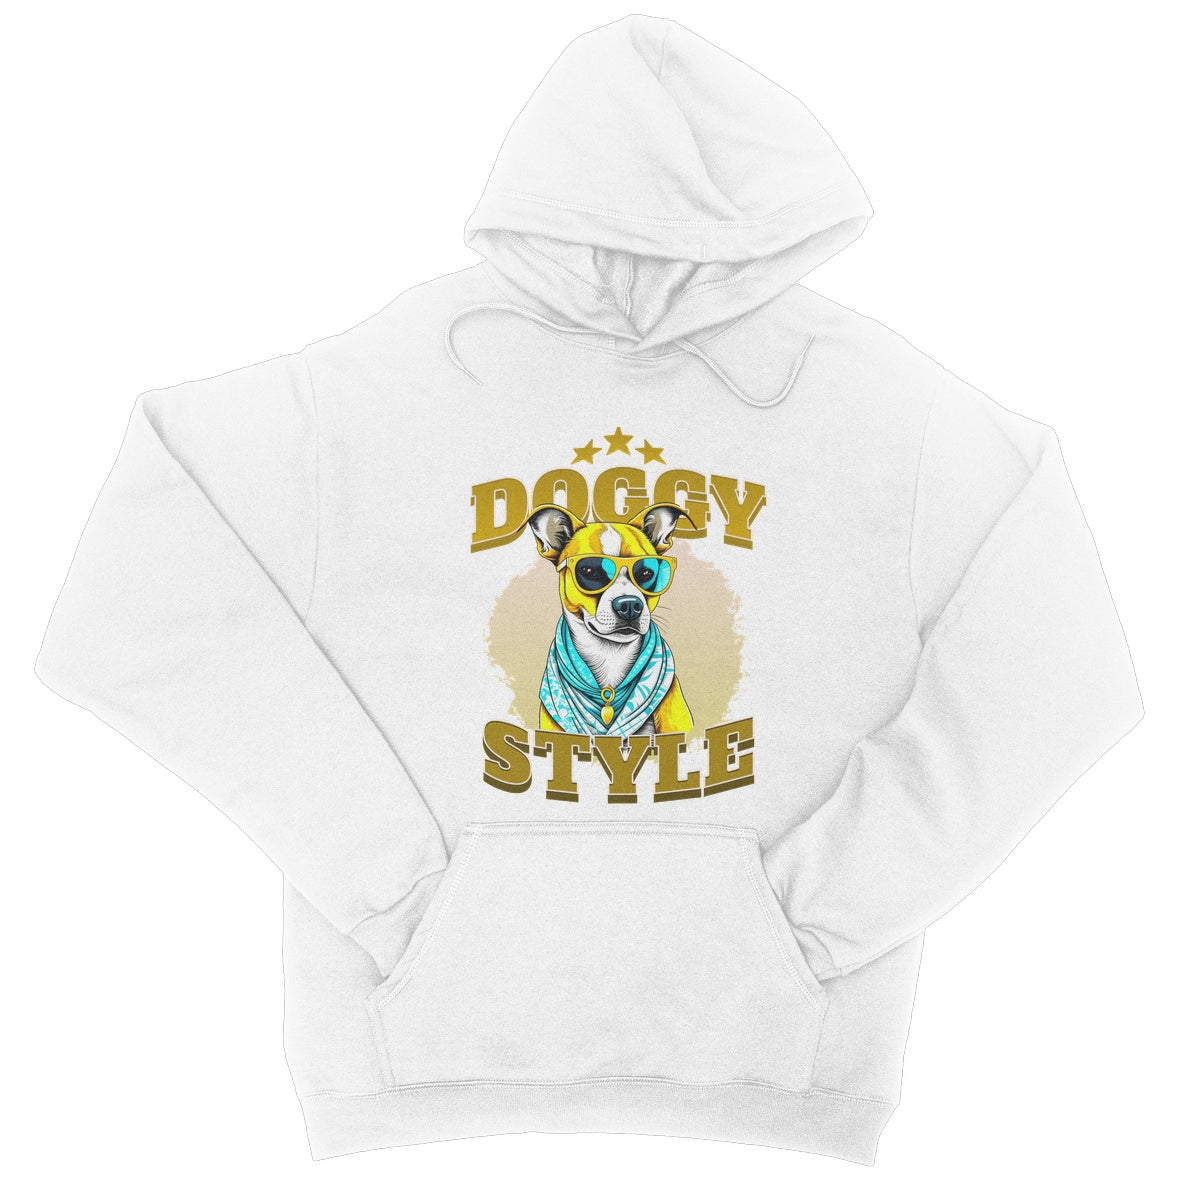 doggy style hoodie white